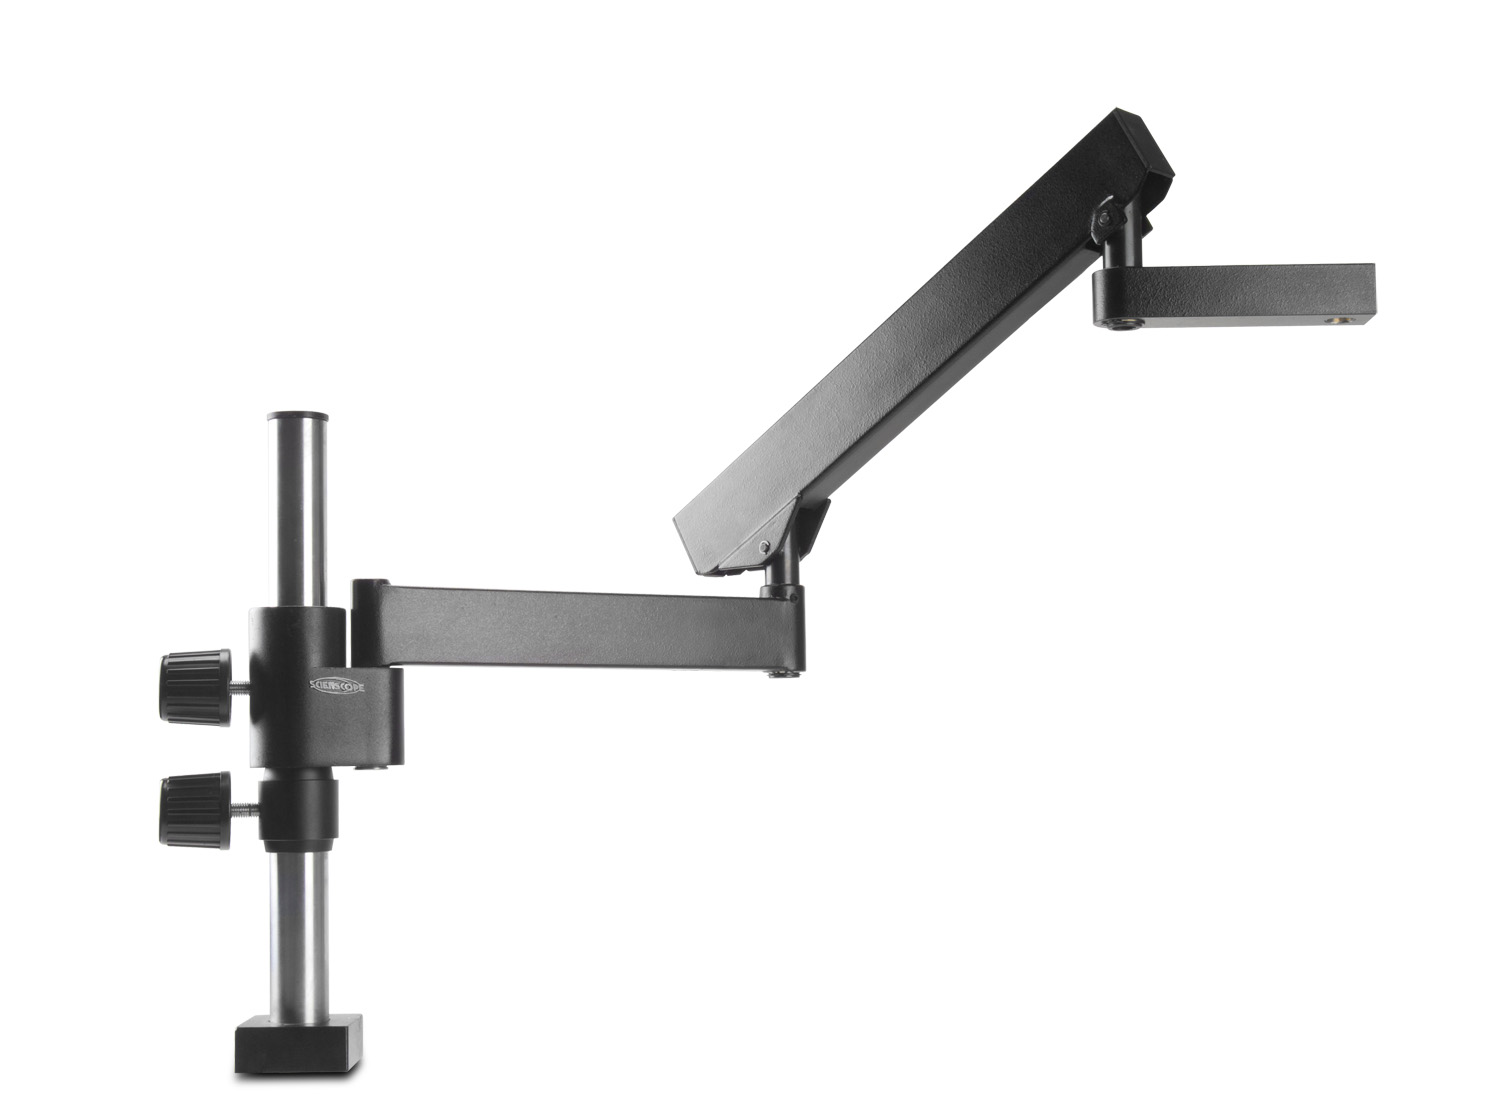 Scienscope SB-CL2-FX Articulating Arm on Clamp Base